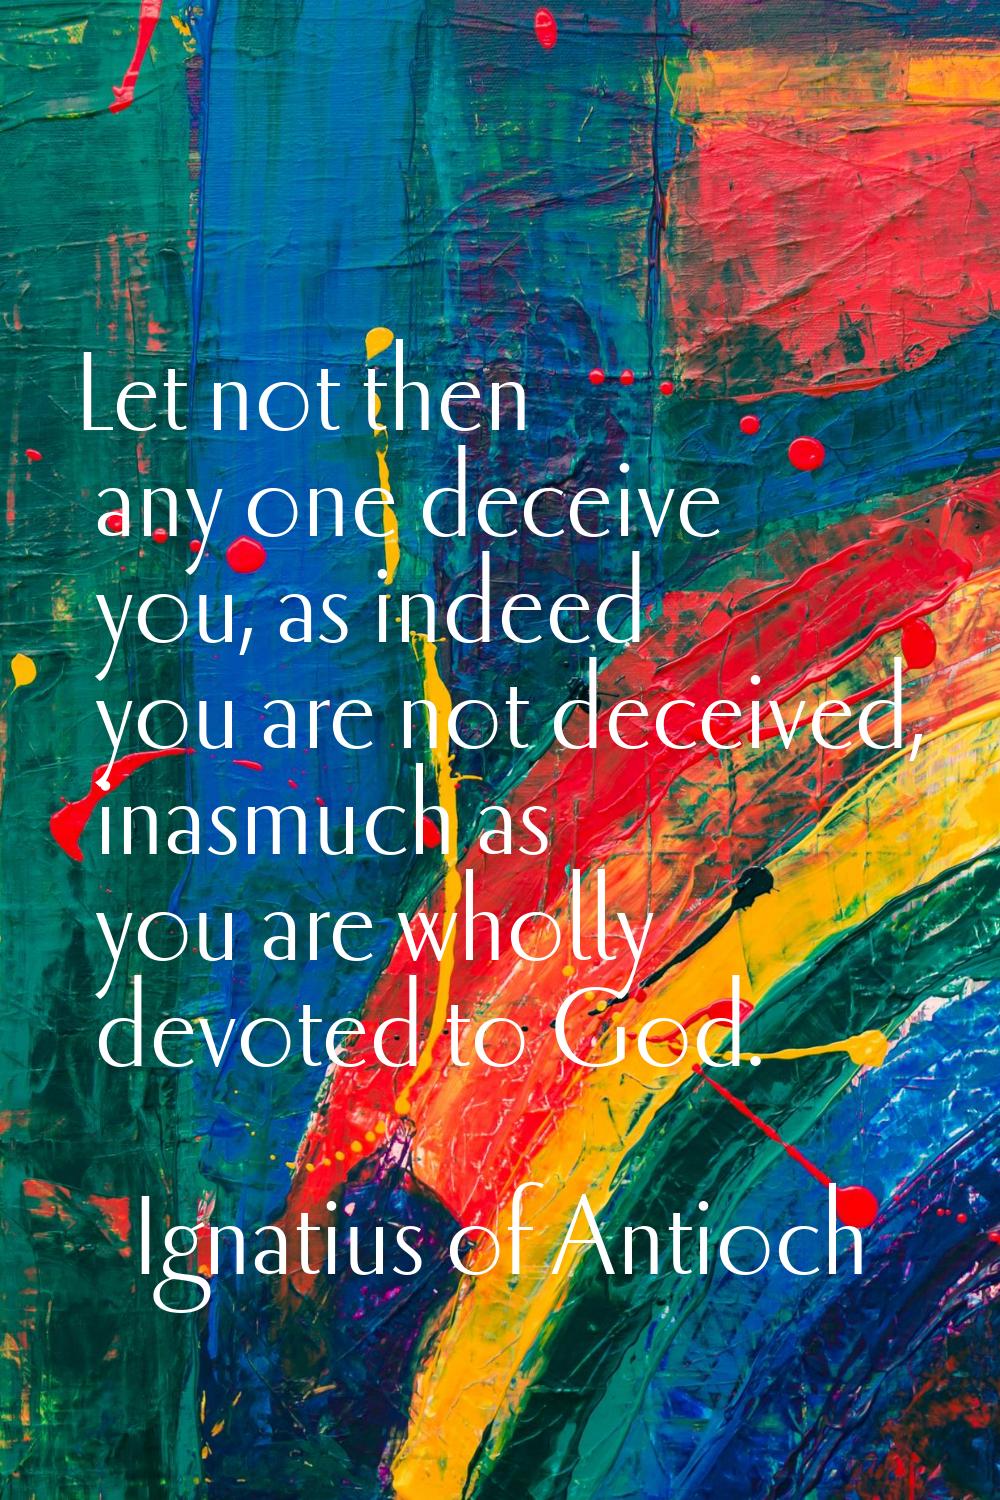 Let not then any one deceive you, as indeed you are not deceived, inasmuch as you are wholly devote